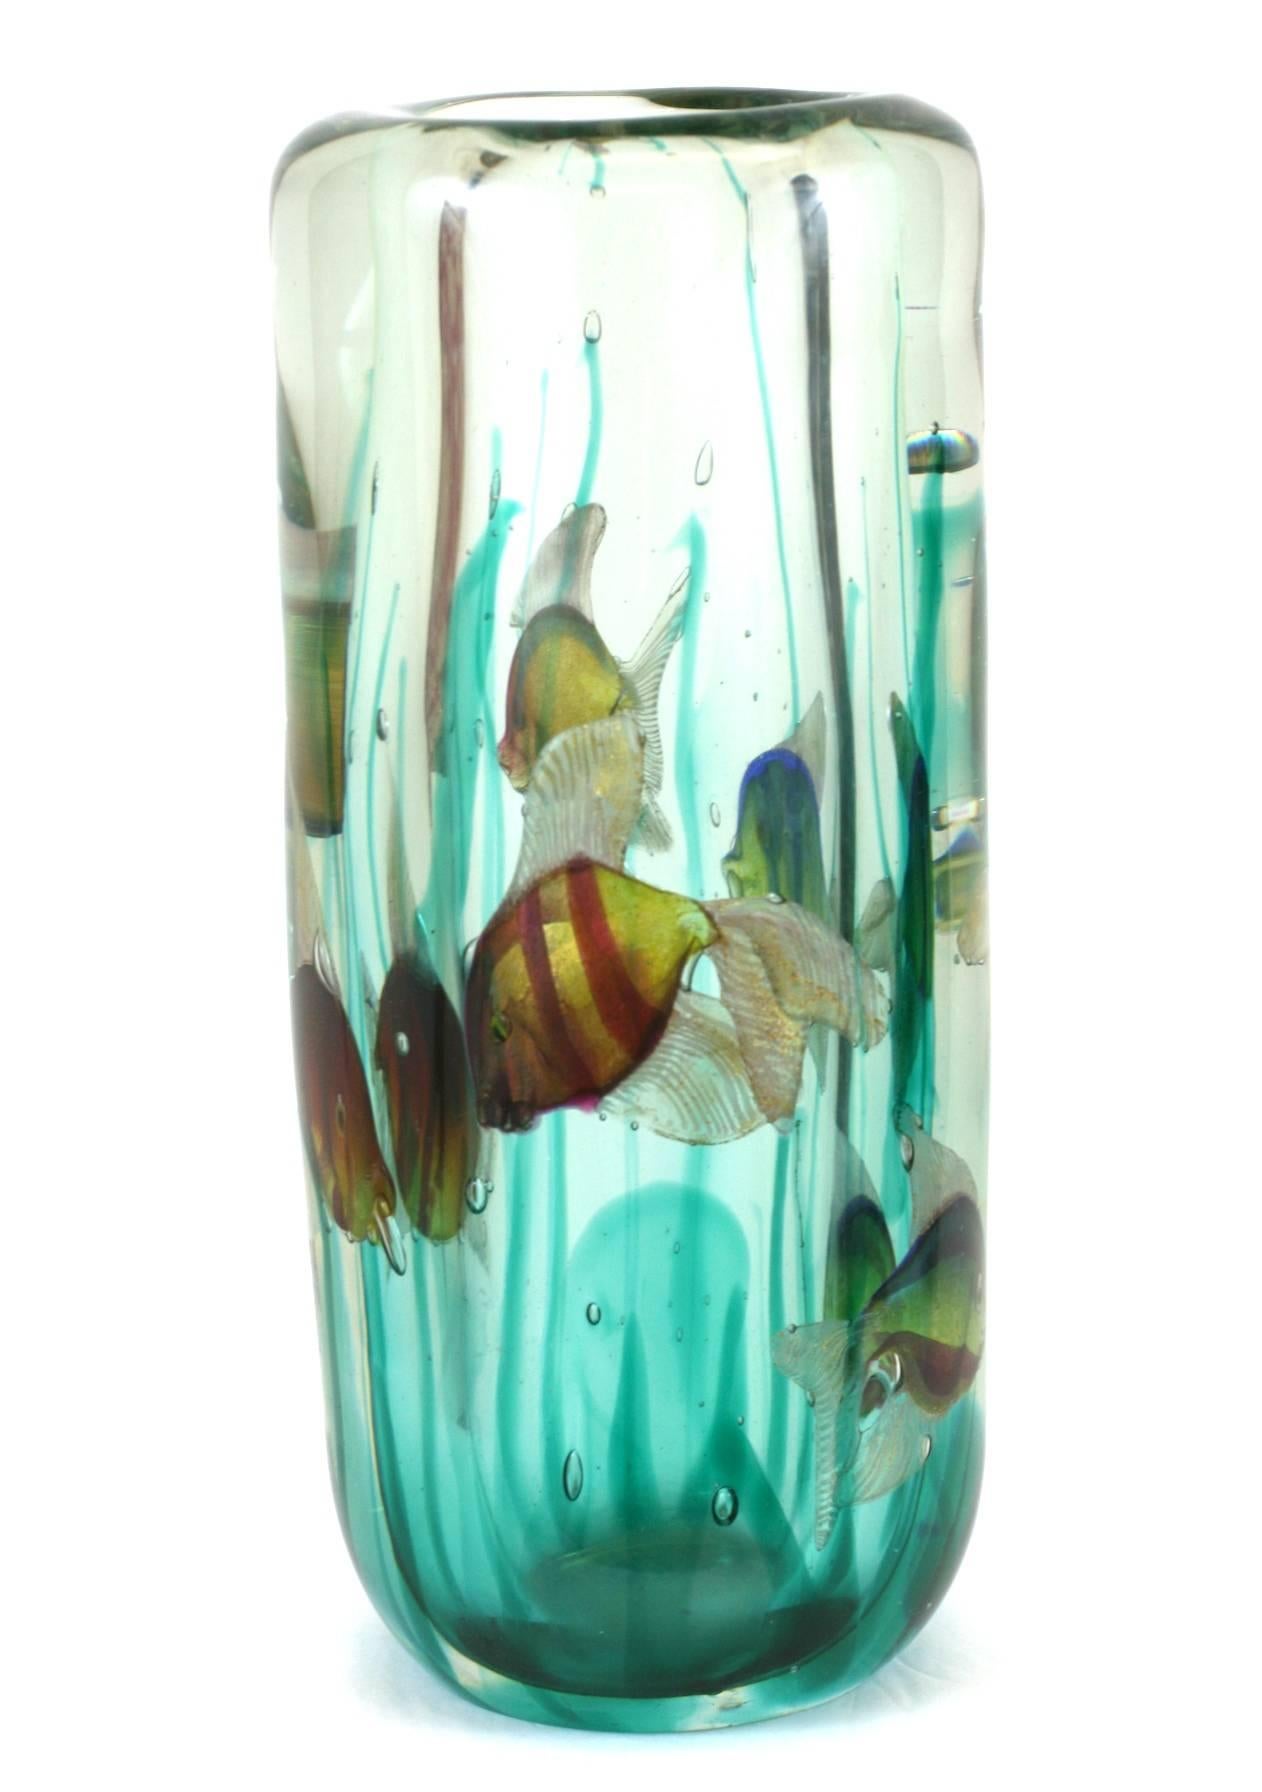 Lovely Barbini aquarium vase with original light base. Seaweed tendrils rise toward the top with beautifully detailed fish throughout. When lit from below, the piece comes to life.
Glass walls measures 1.5